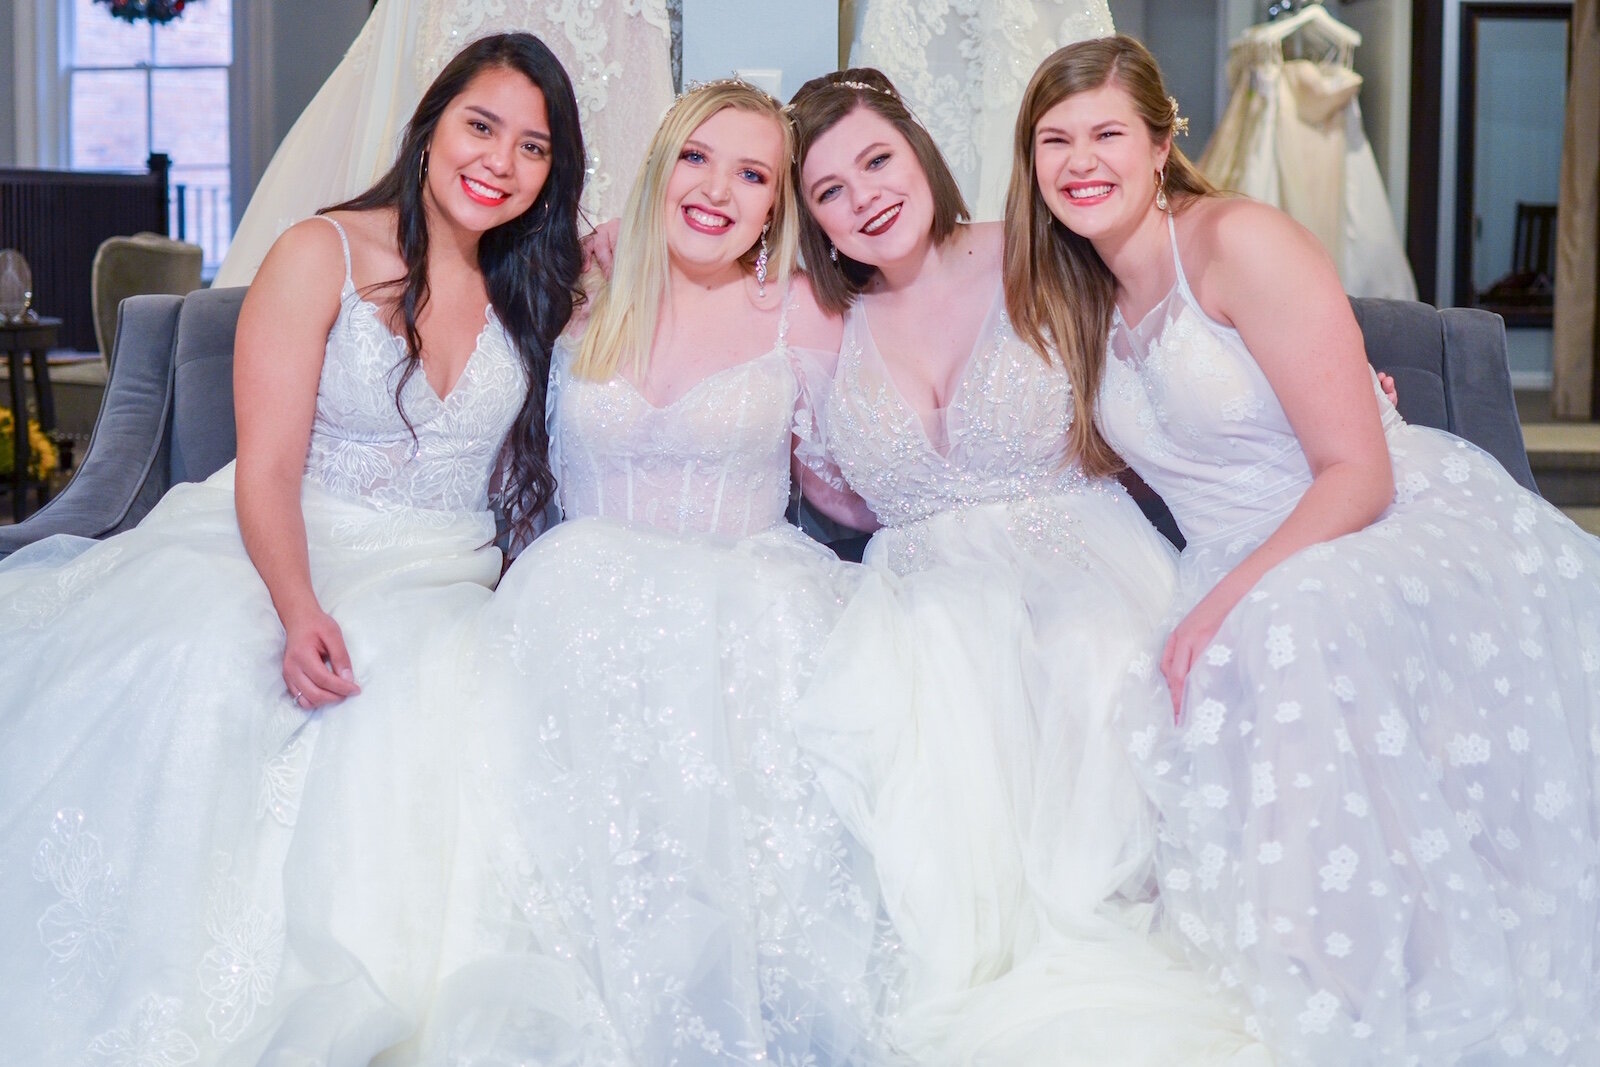 Some of the bridal stylists at Memories Bridal & Evening Wear in Kalamazoo are shown during a social media photoshoot this past December. From left, they are: Margarita Castillo, Jodi Isaacson, Mae Bright and Rachel Hansen.